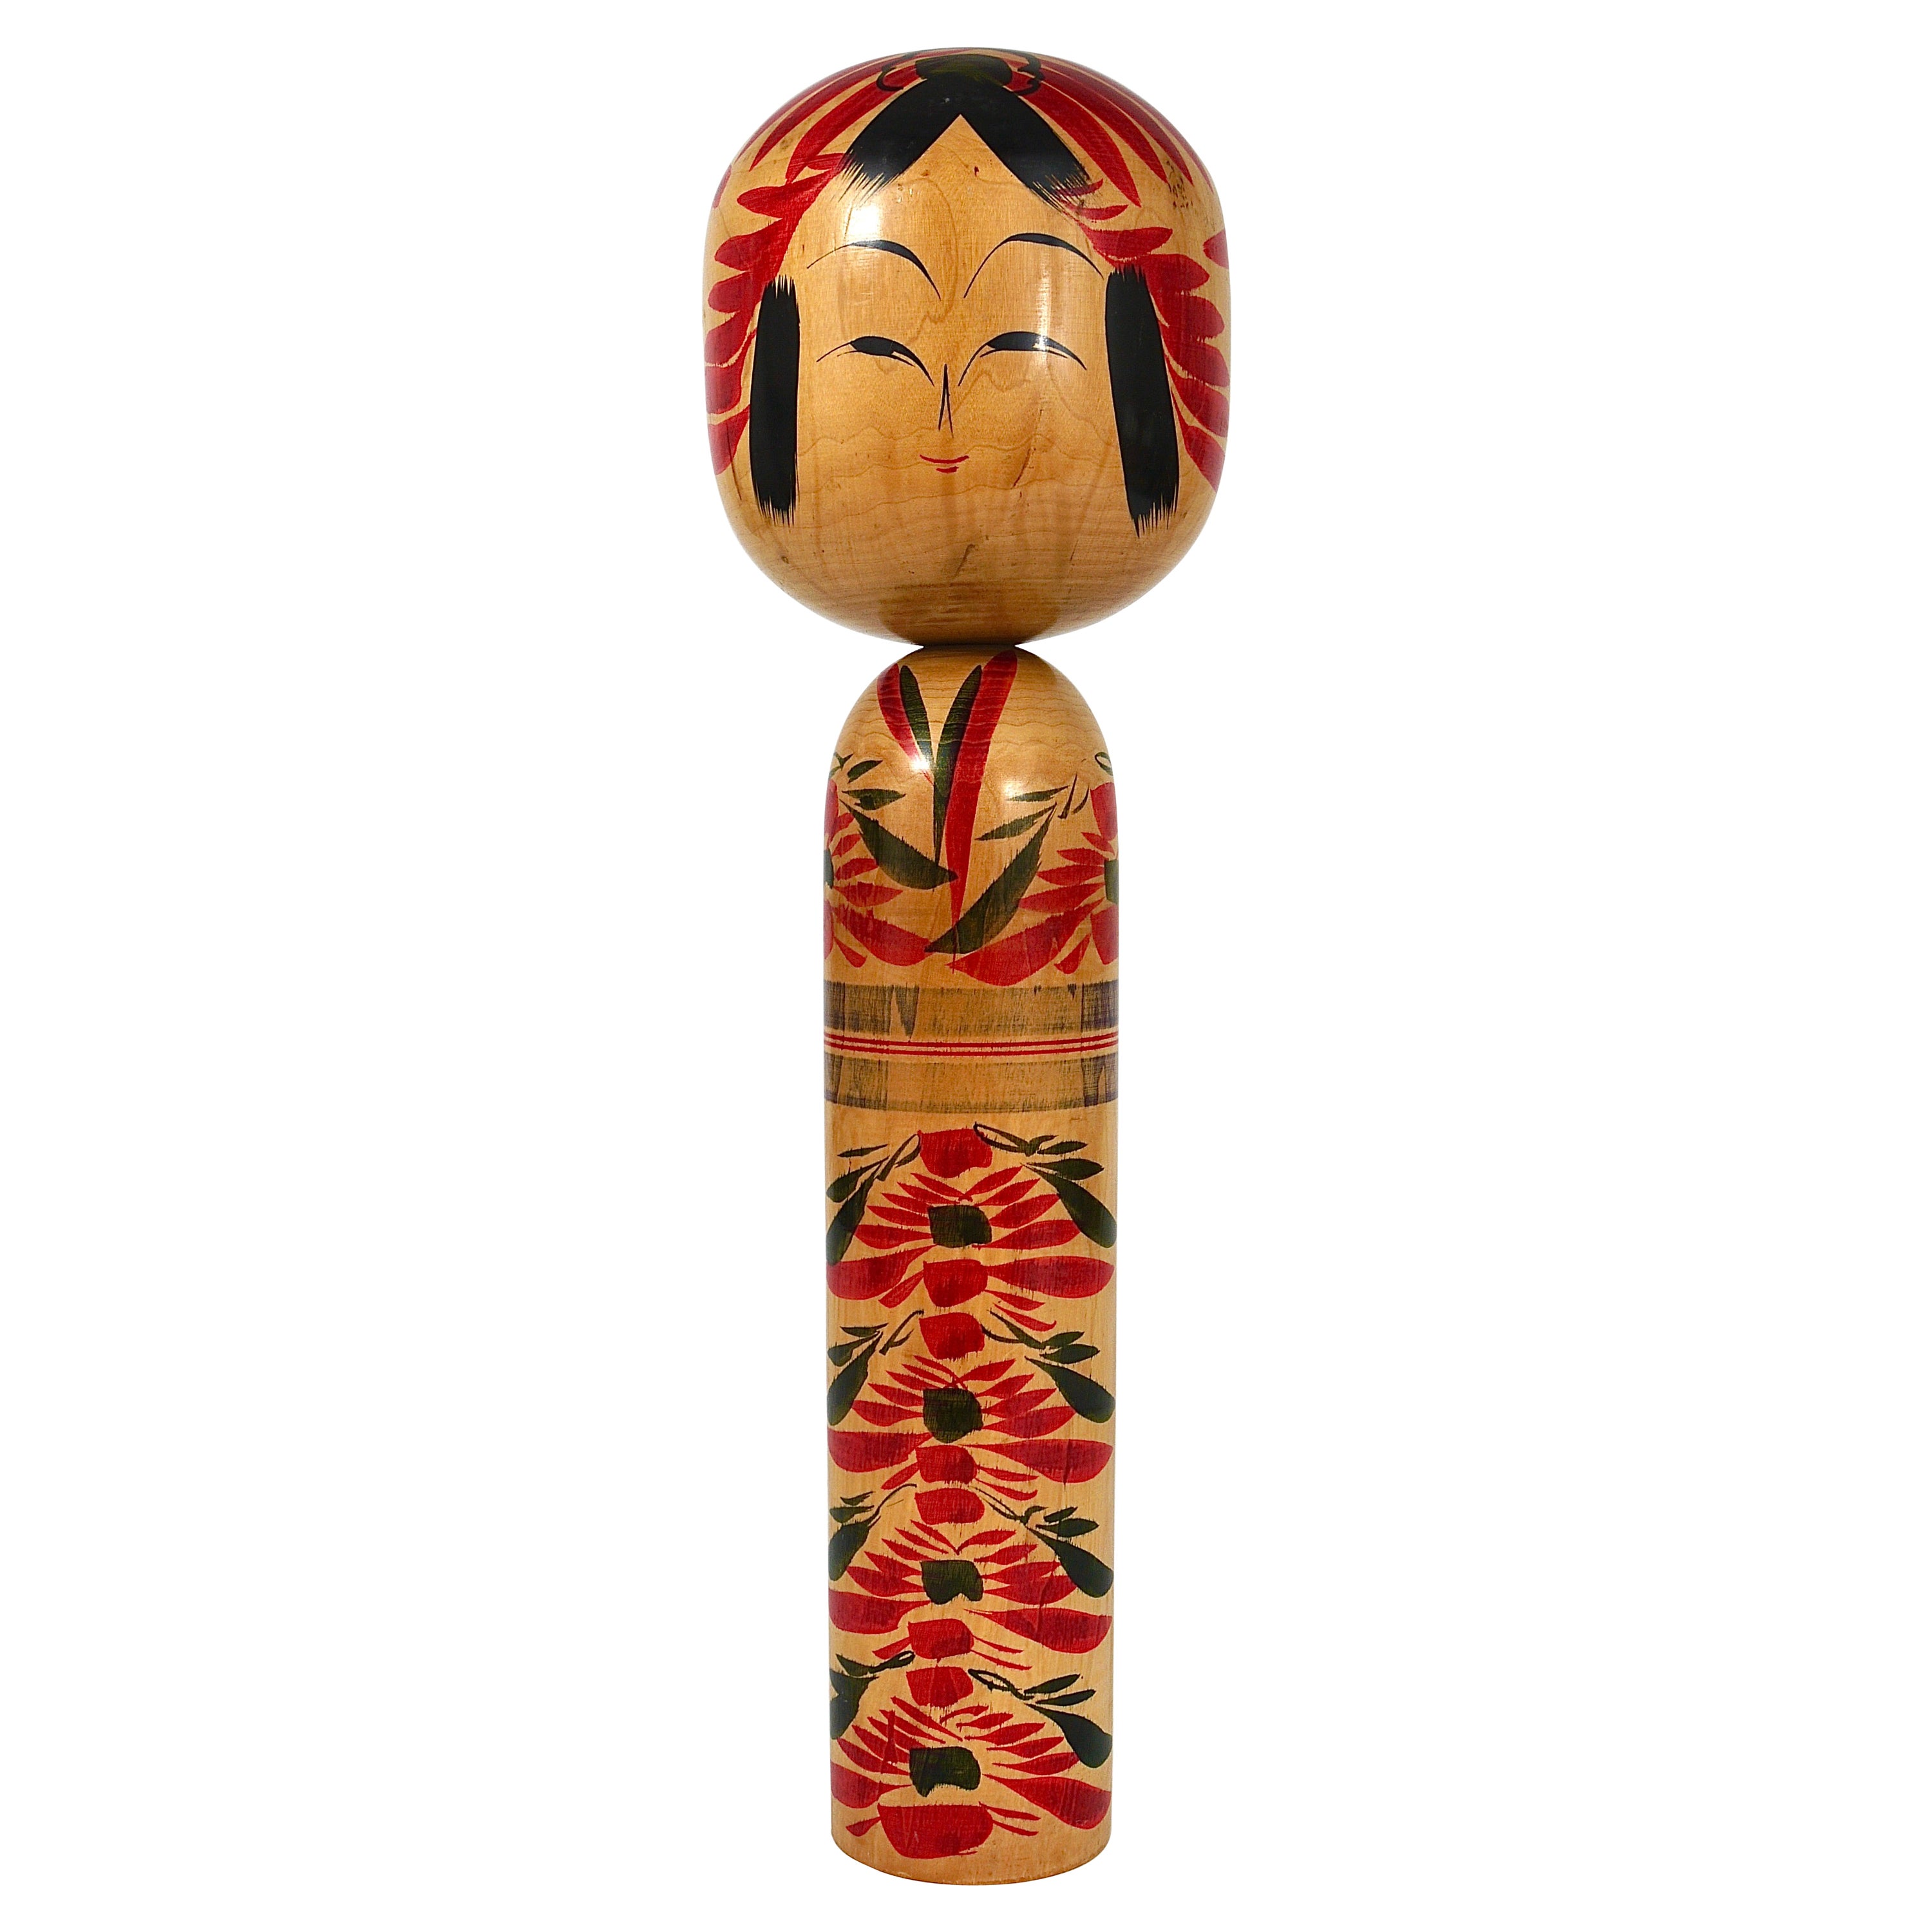 Decorative Kokeshi Doll Sculpture from Northern Japan, Hand-Painted, Signed